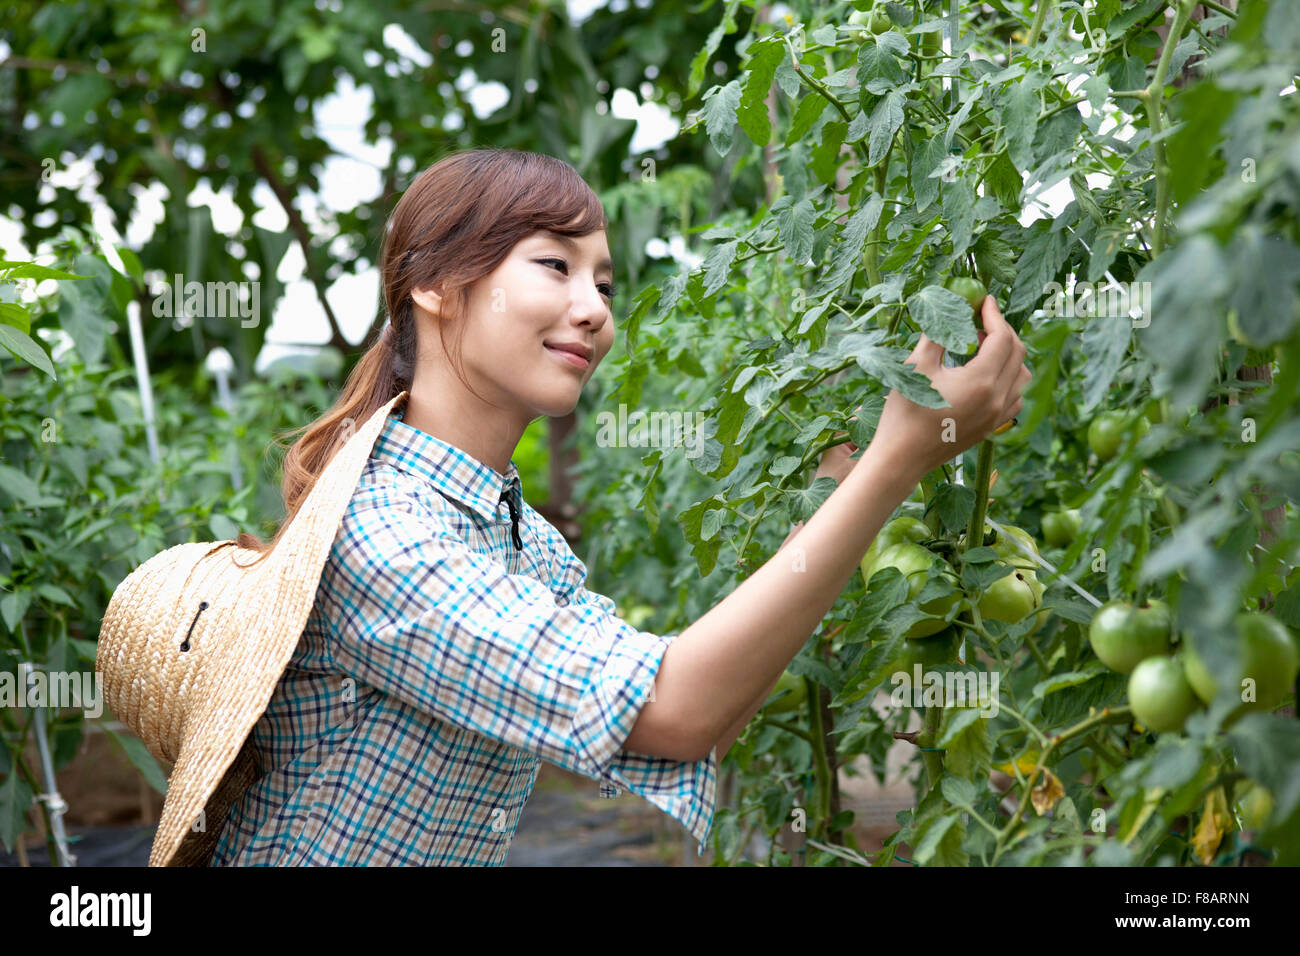 Side view portrait of woman observing green tomato with a smile Stock Photo